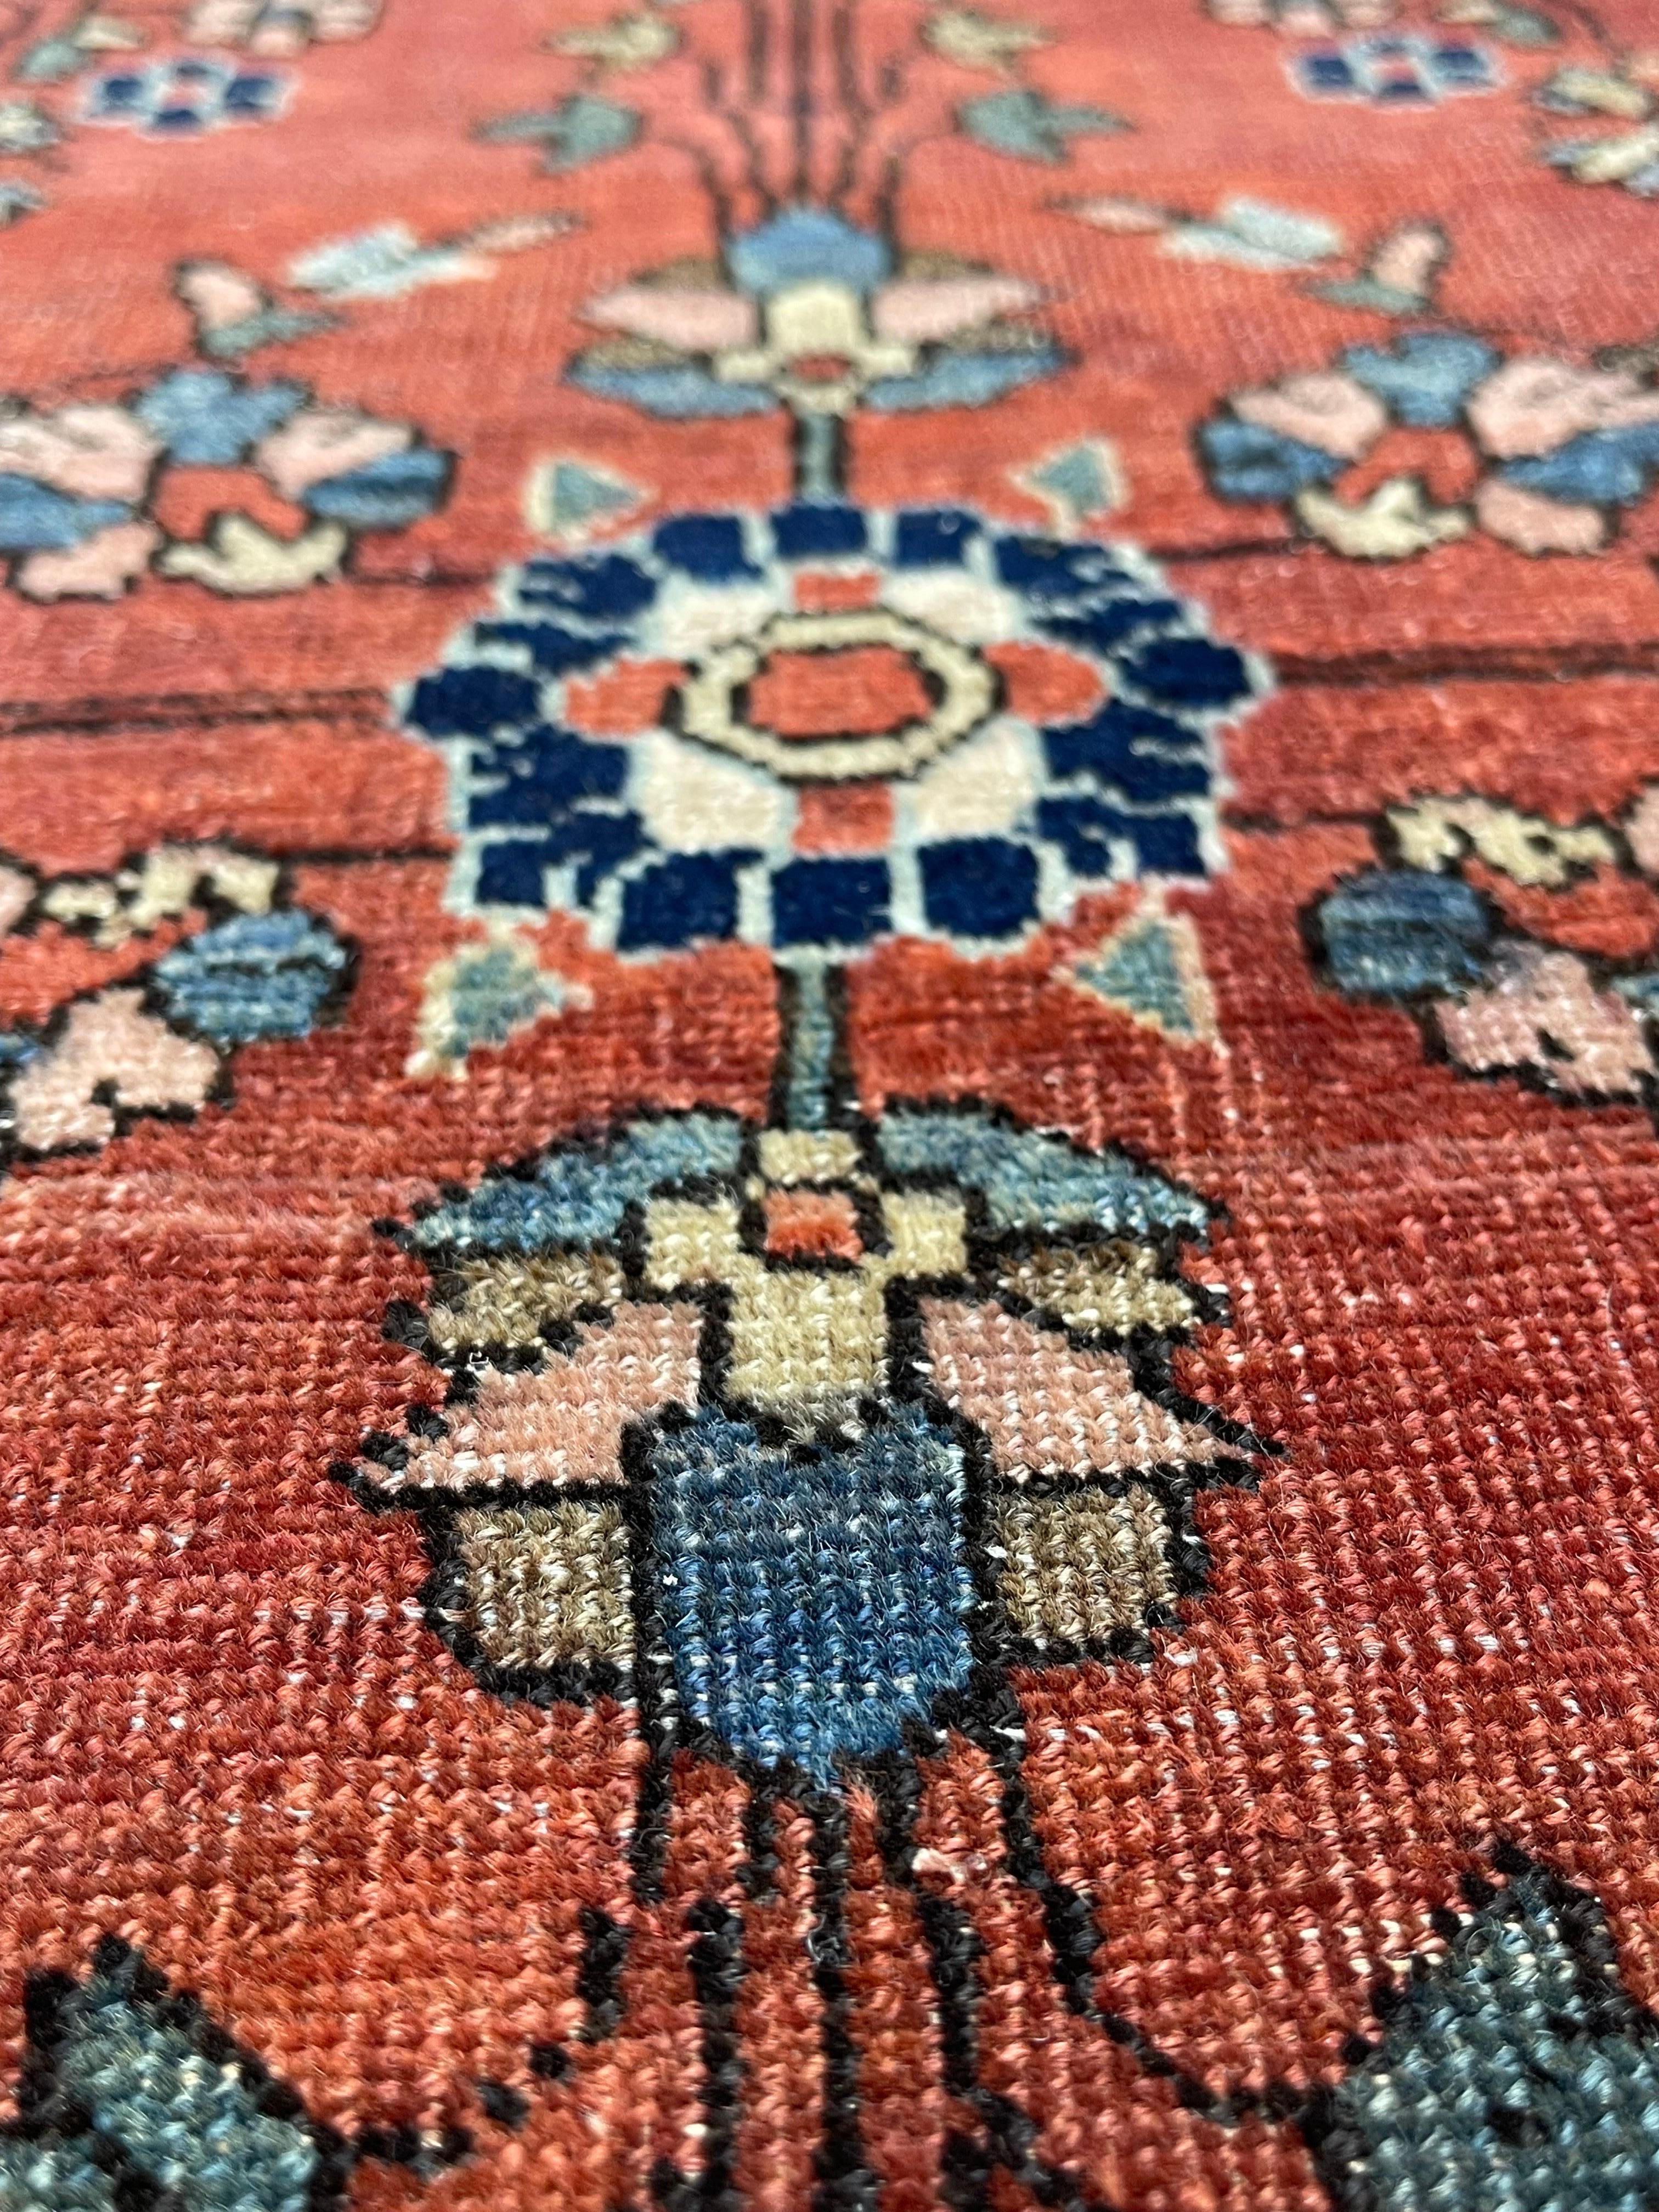 Woven with very fine knots,this rug was handmade in the town of Farahan in west Persia. Wool used to make this rug is hard and clipped very flat the reason it has aged very well and has maintained its original design even in the areas where pile is